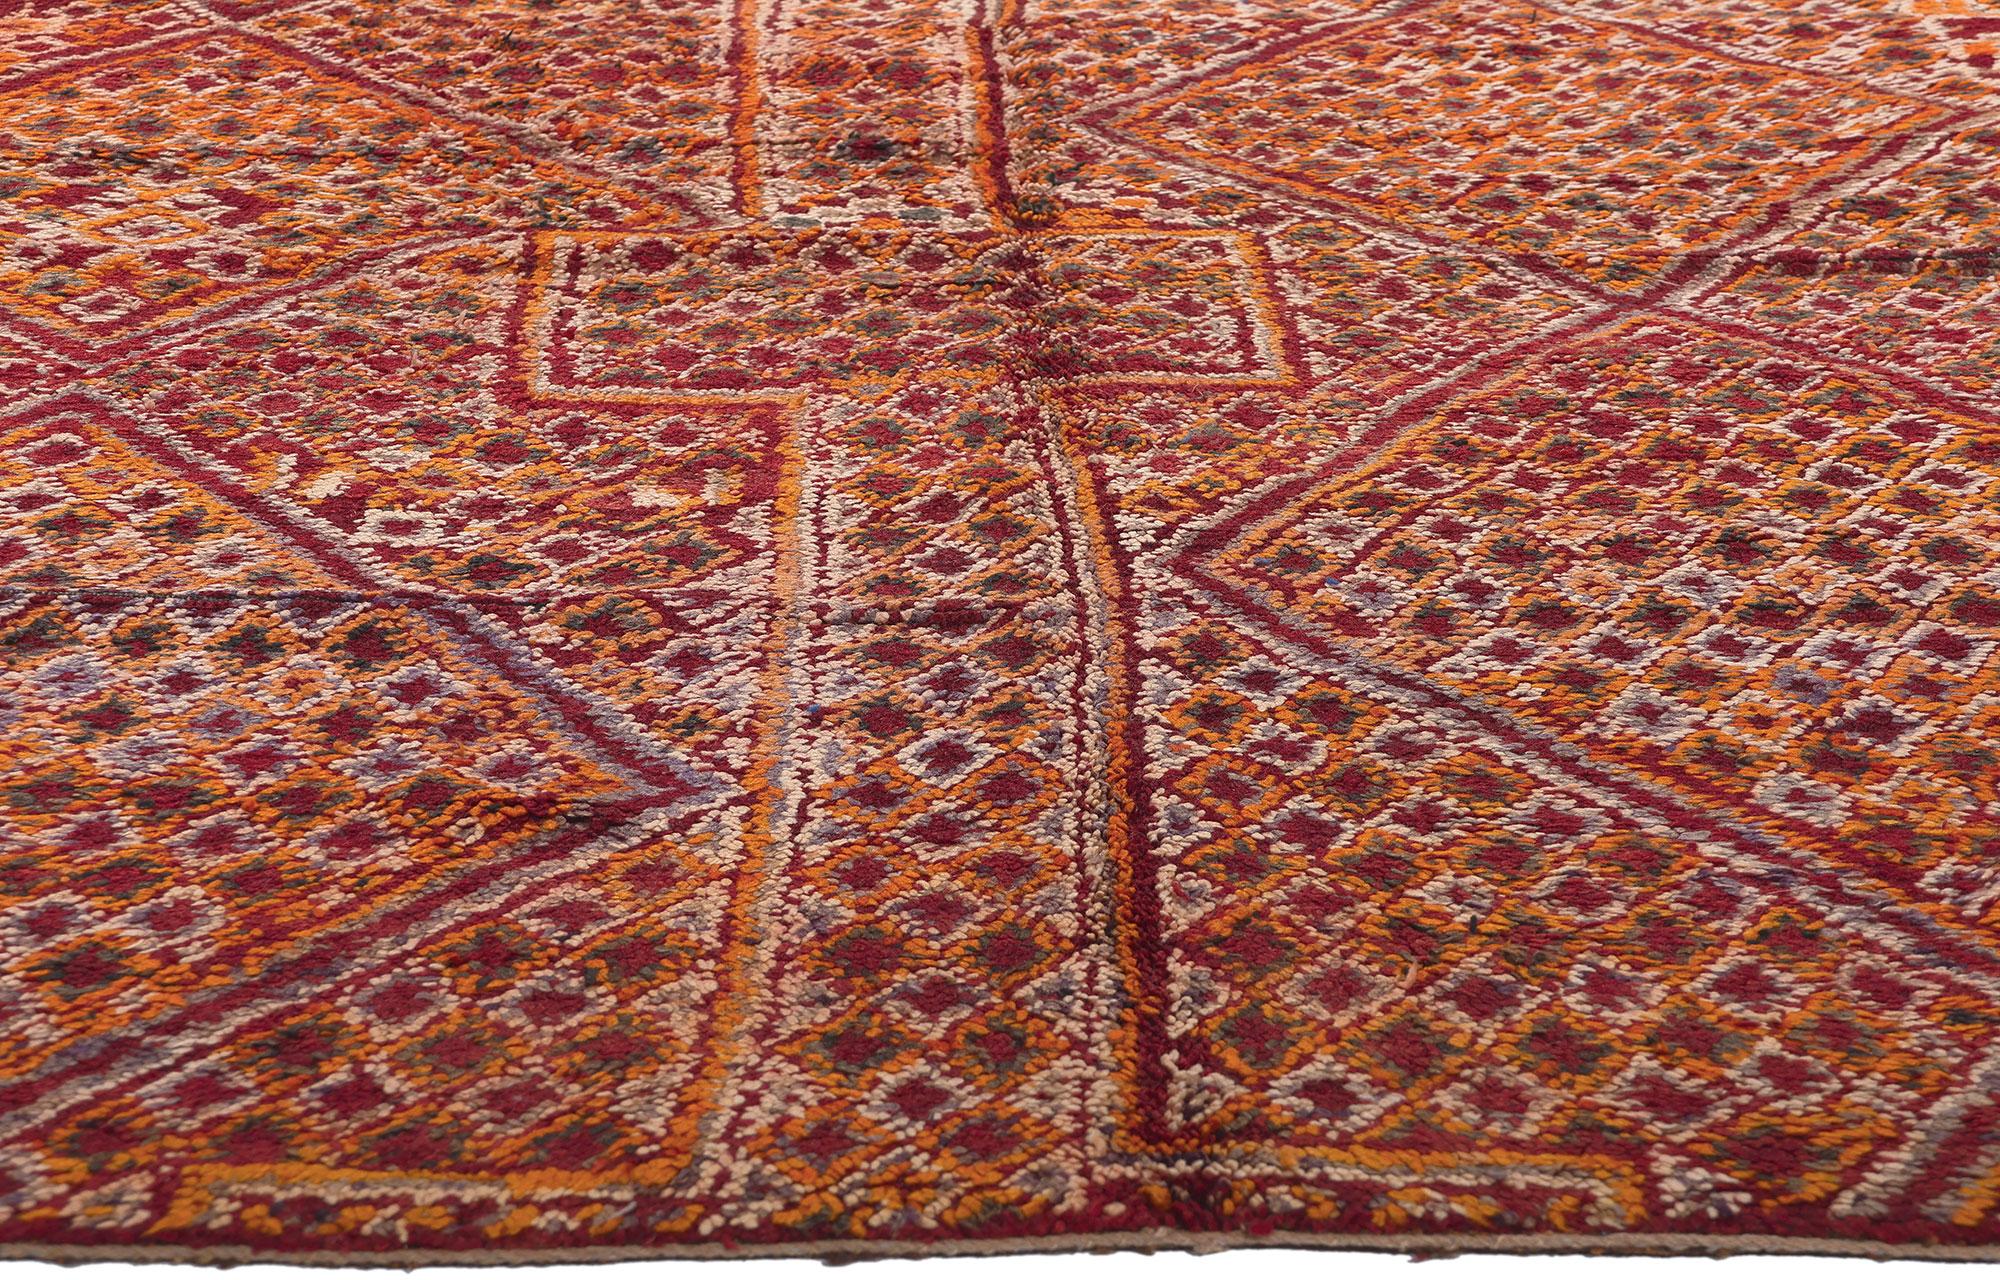 Hand-Knotted Vintage Beni MGuild Moroccan Rug, Irresistibly Chic Meets Sophisticated Boho For Sale